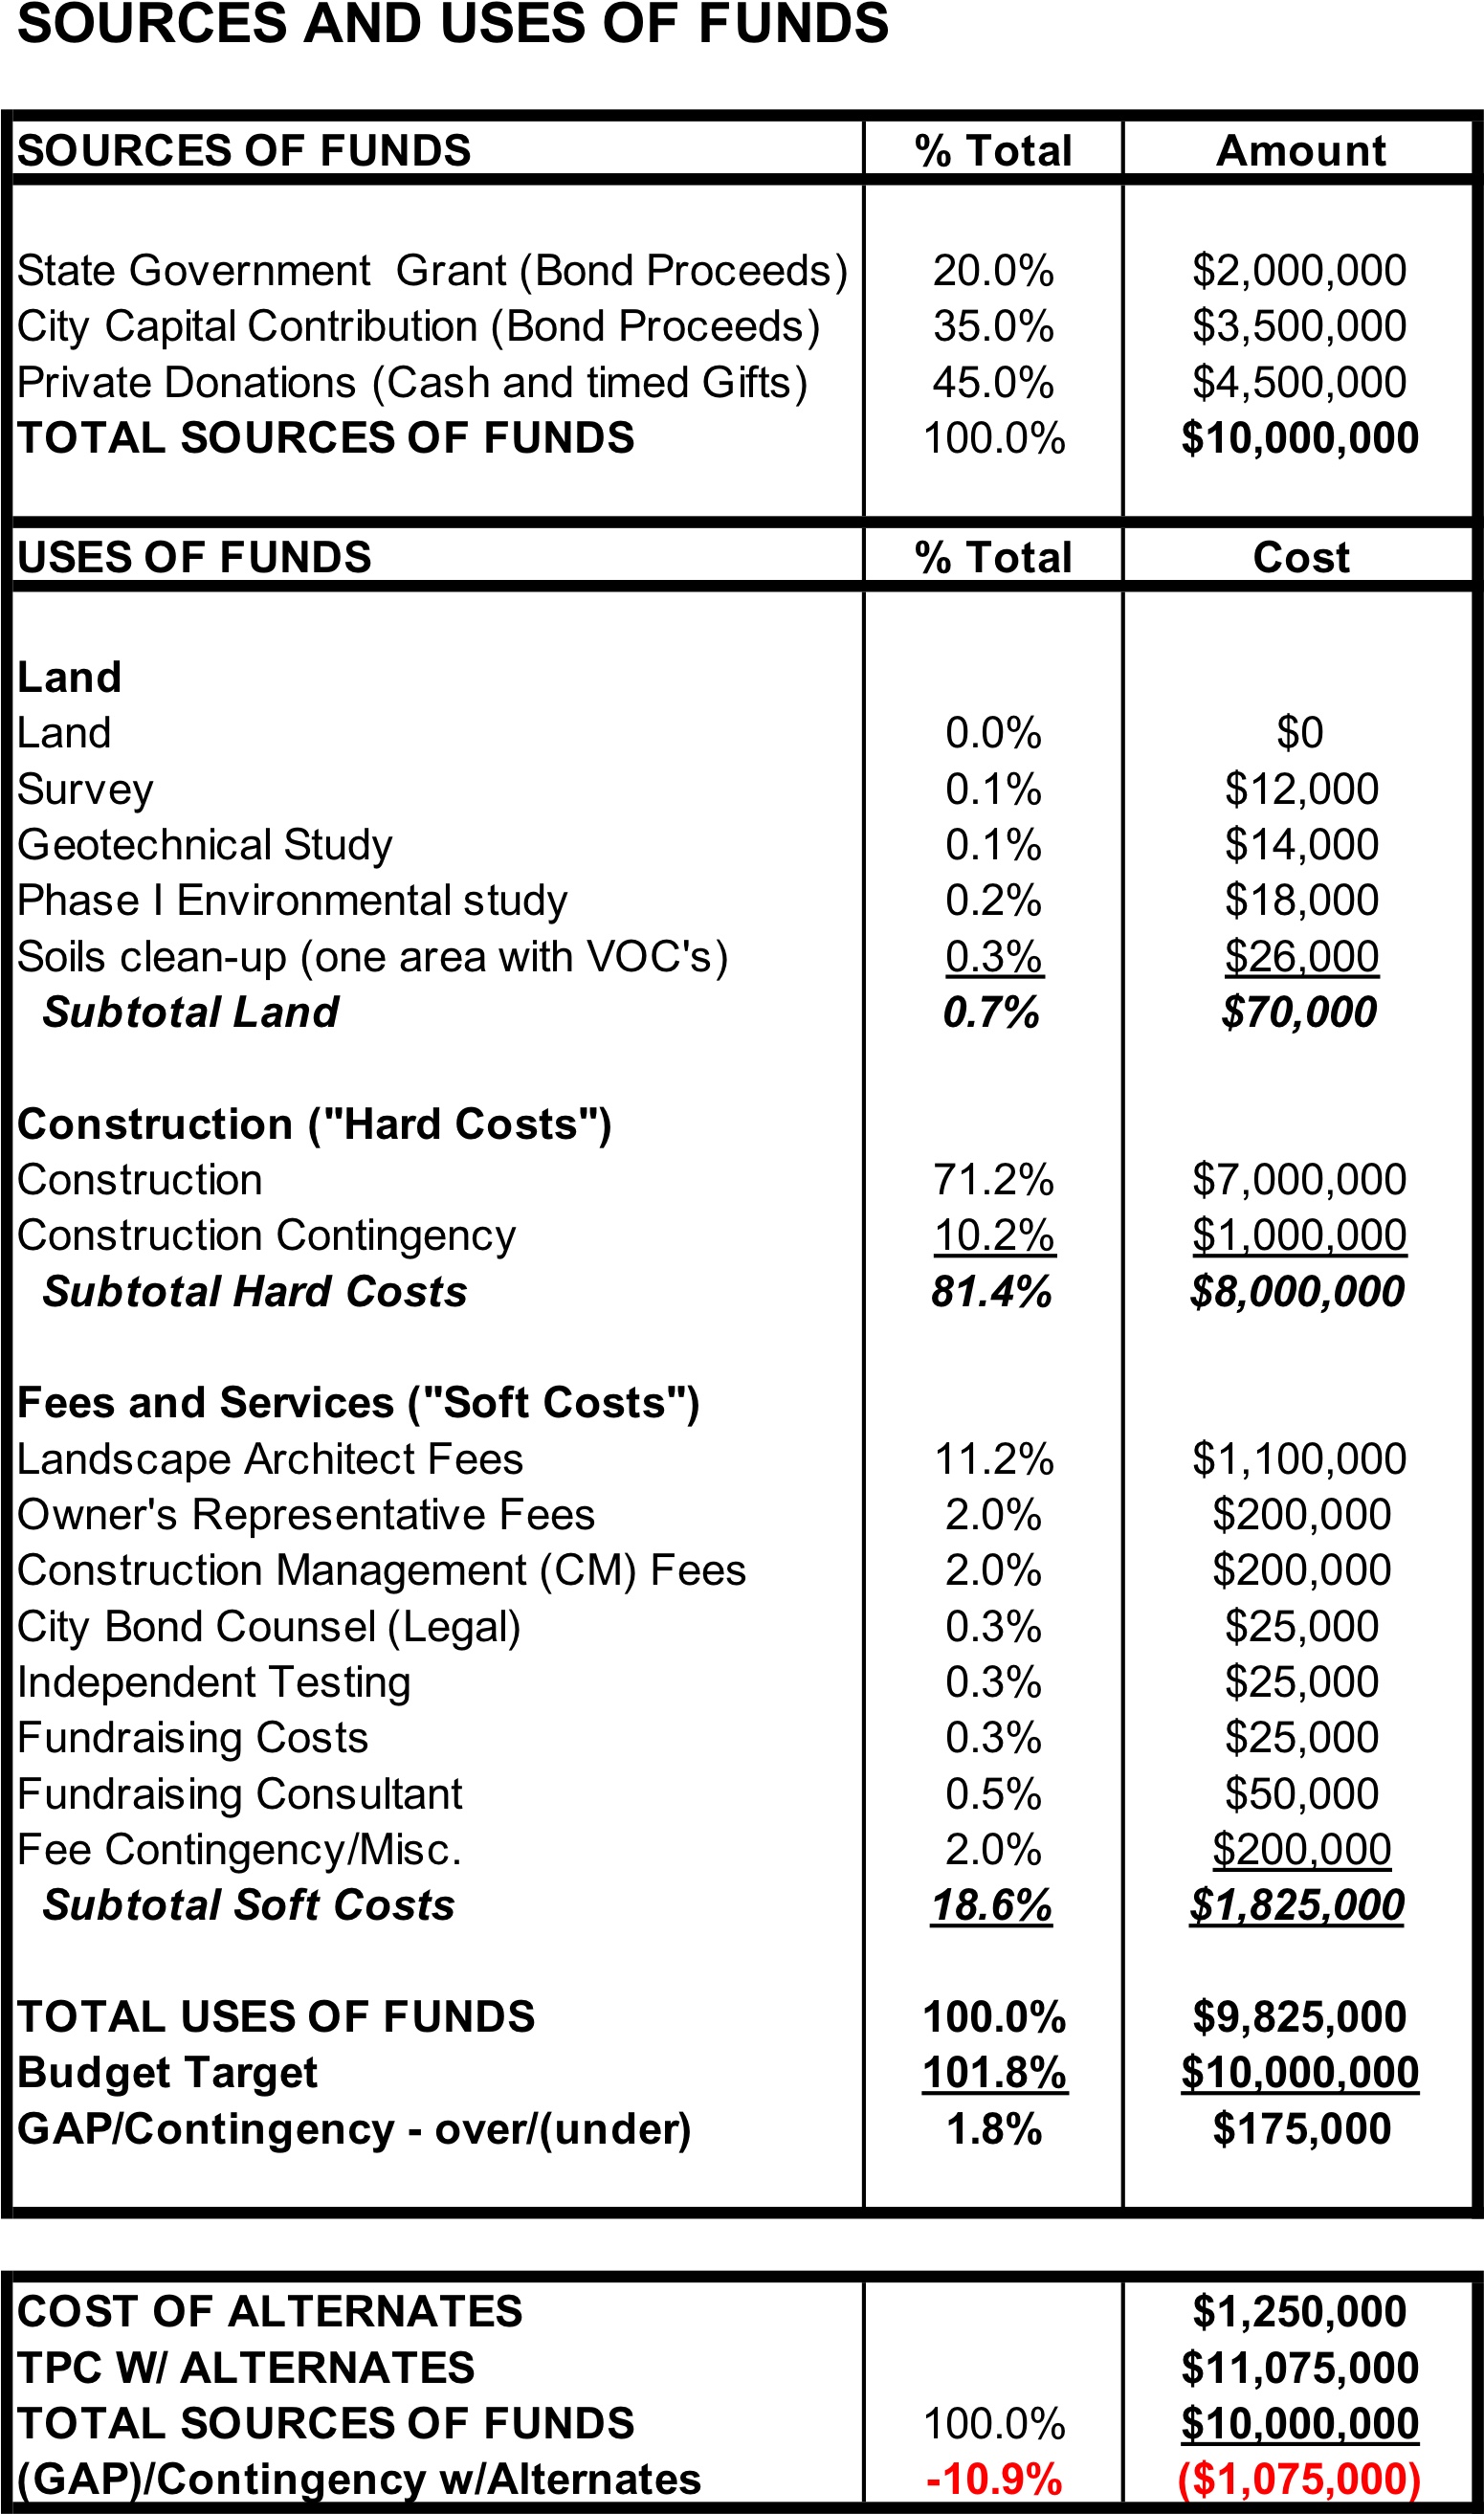 Table showing sources and uses of funds in a table (with dollar figures and percentages of totals).